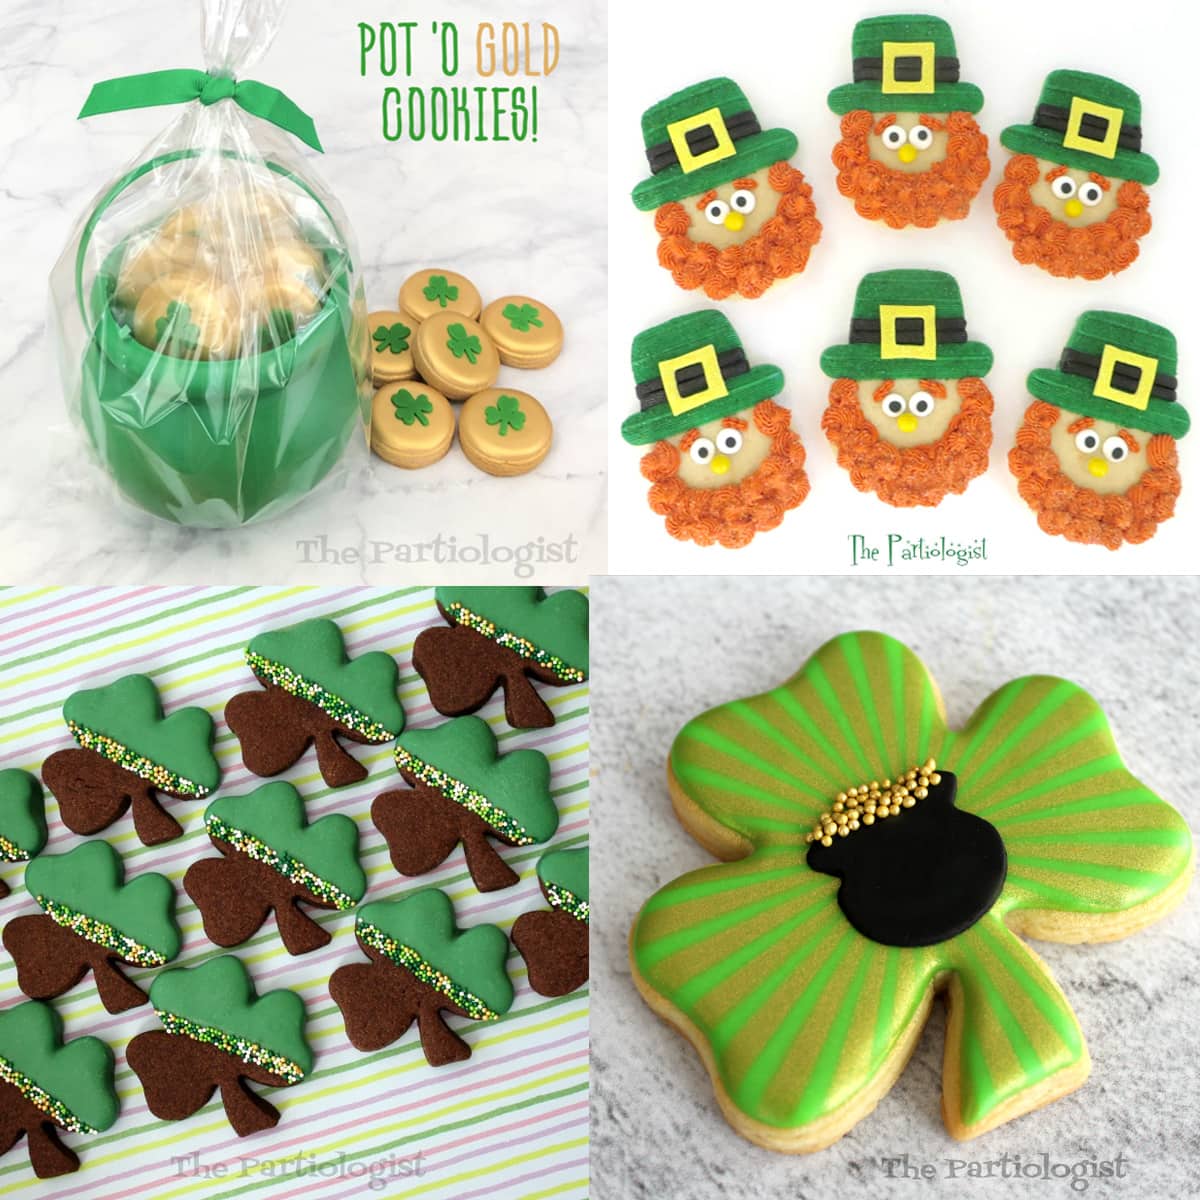 St. Patrick's Day cookies including gold coins, leprechauns, and shamrocks